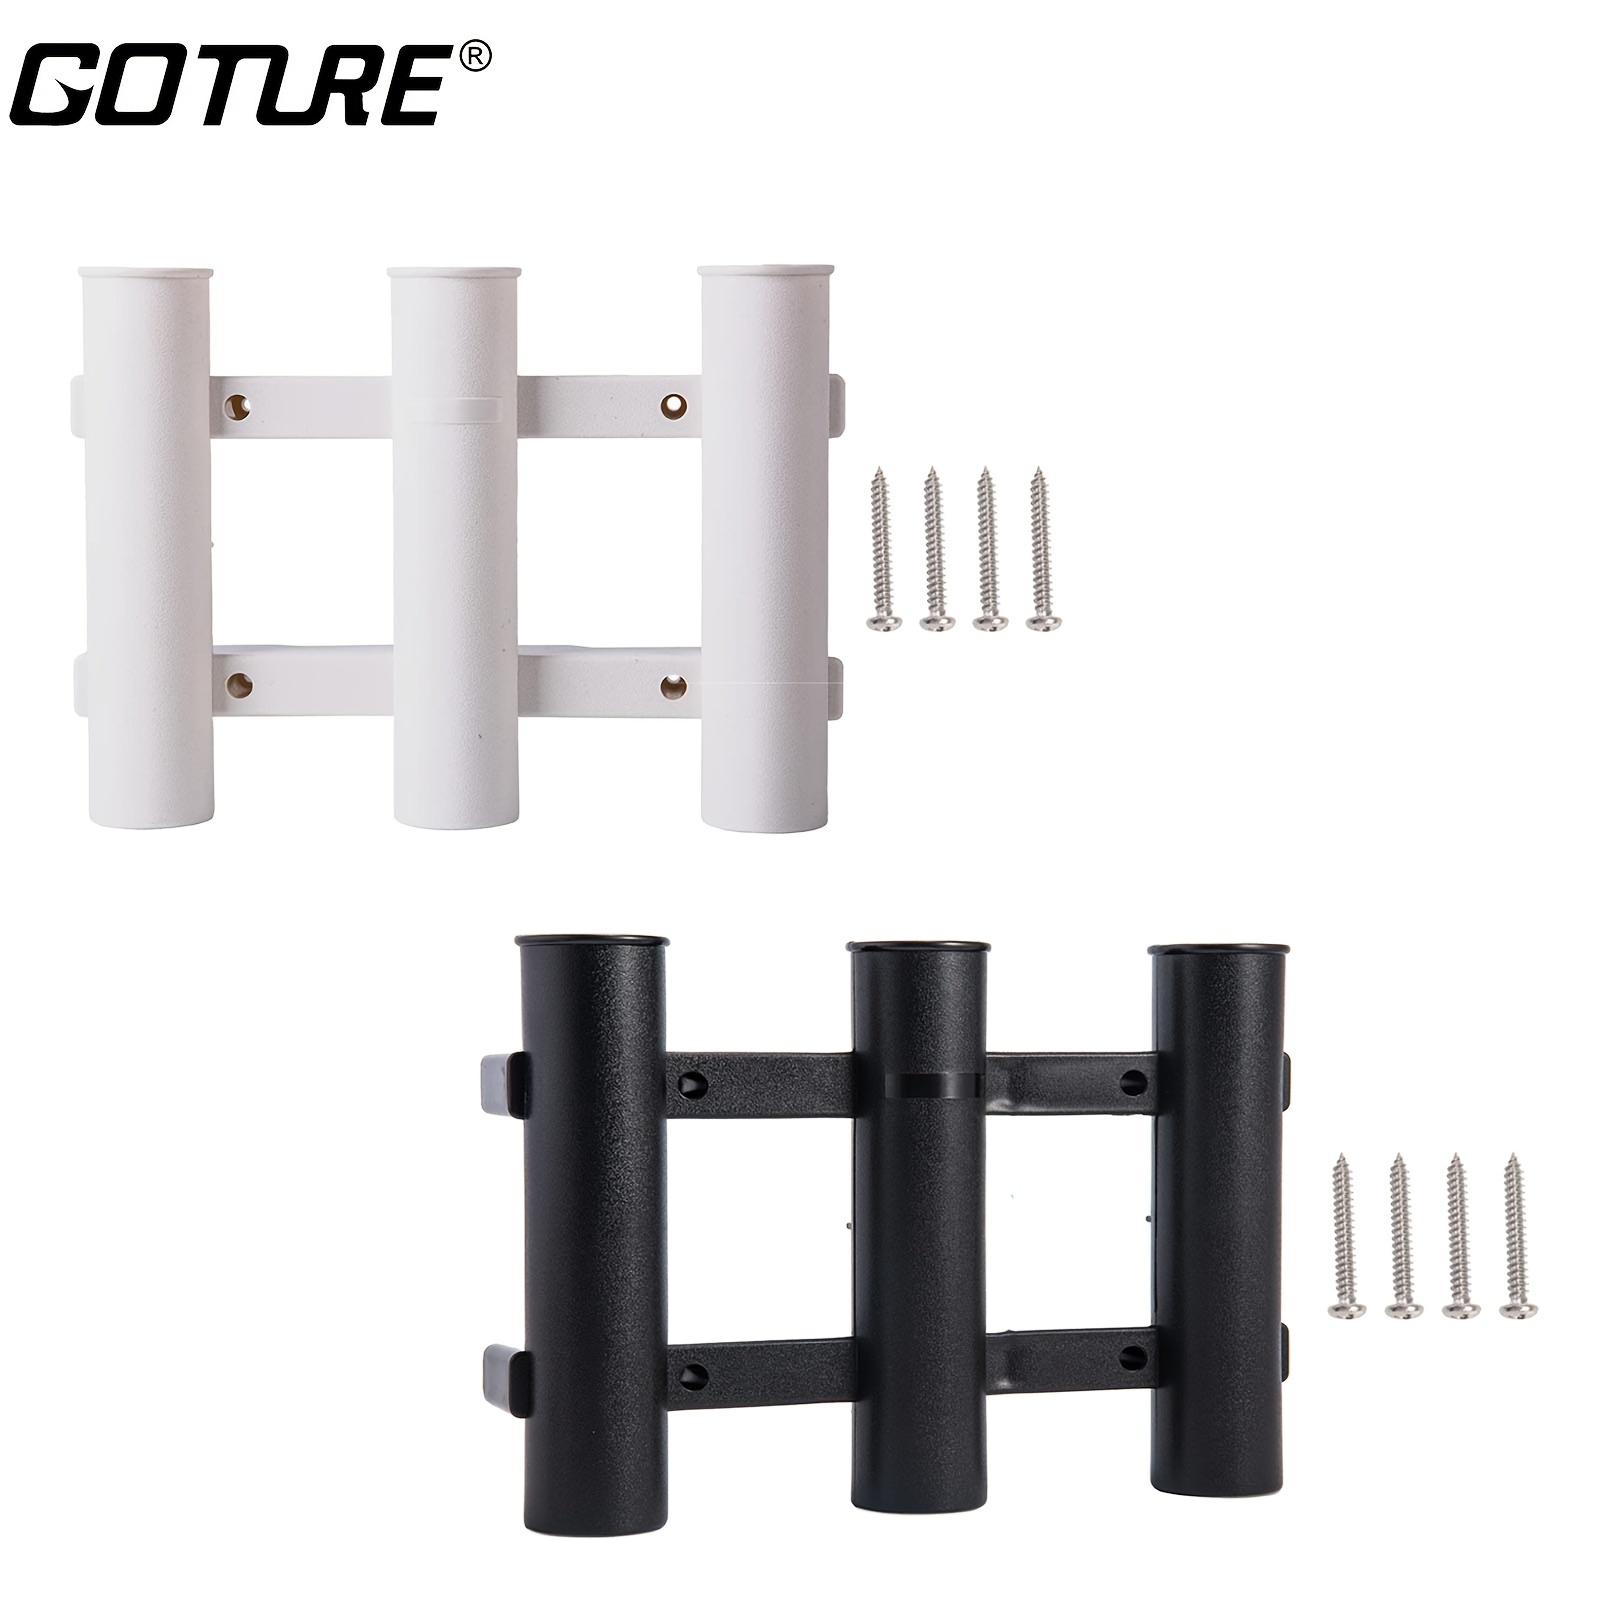 * Boat Fishing Rod Holder - Durable 3 Rod Tube Plastic Holder for  Convenient Fishing Tackle Storage